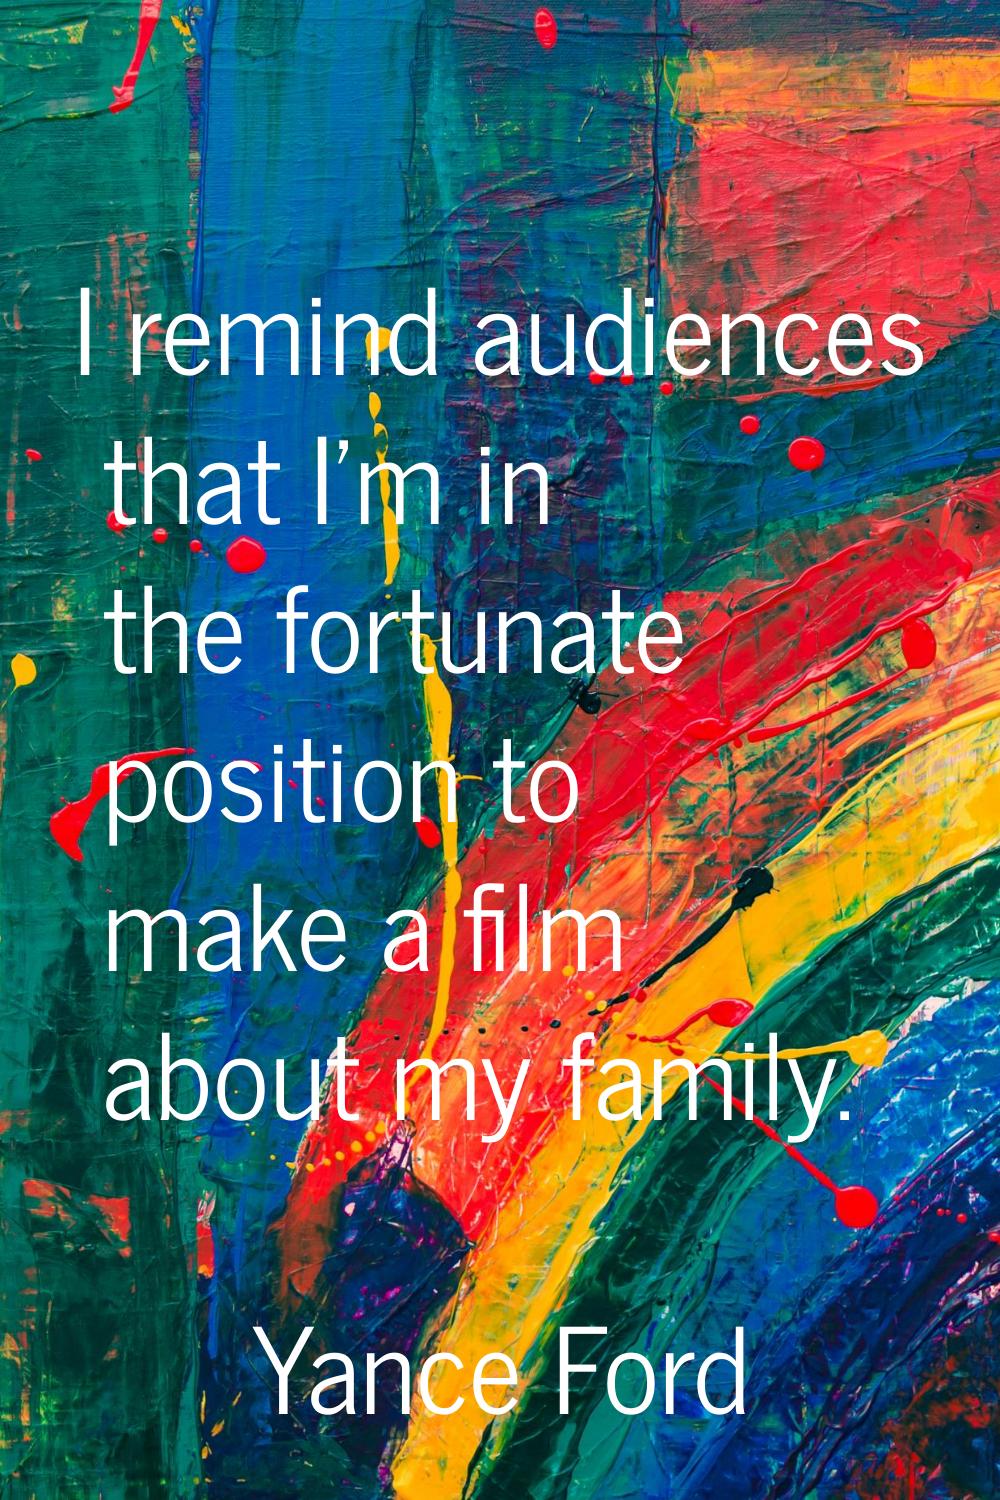 I remind audiences that I'm in the fortunate position to make a film about my family.